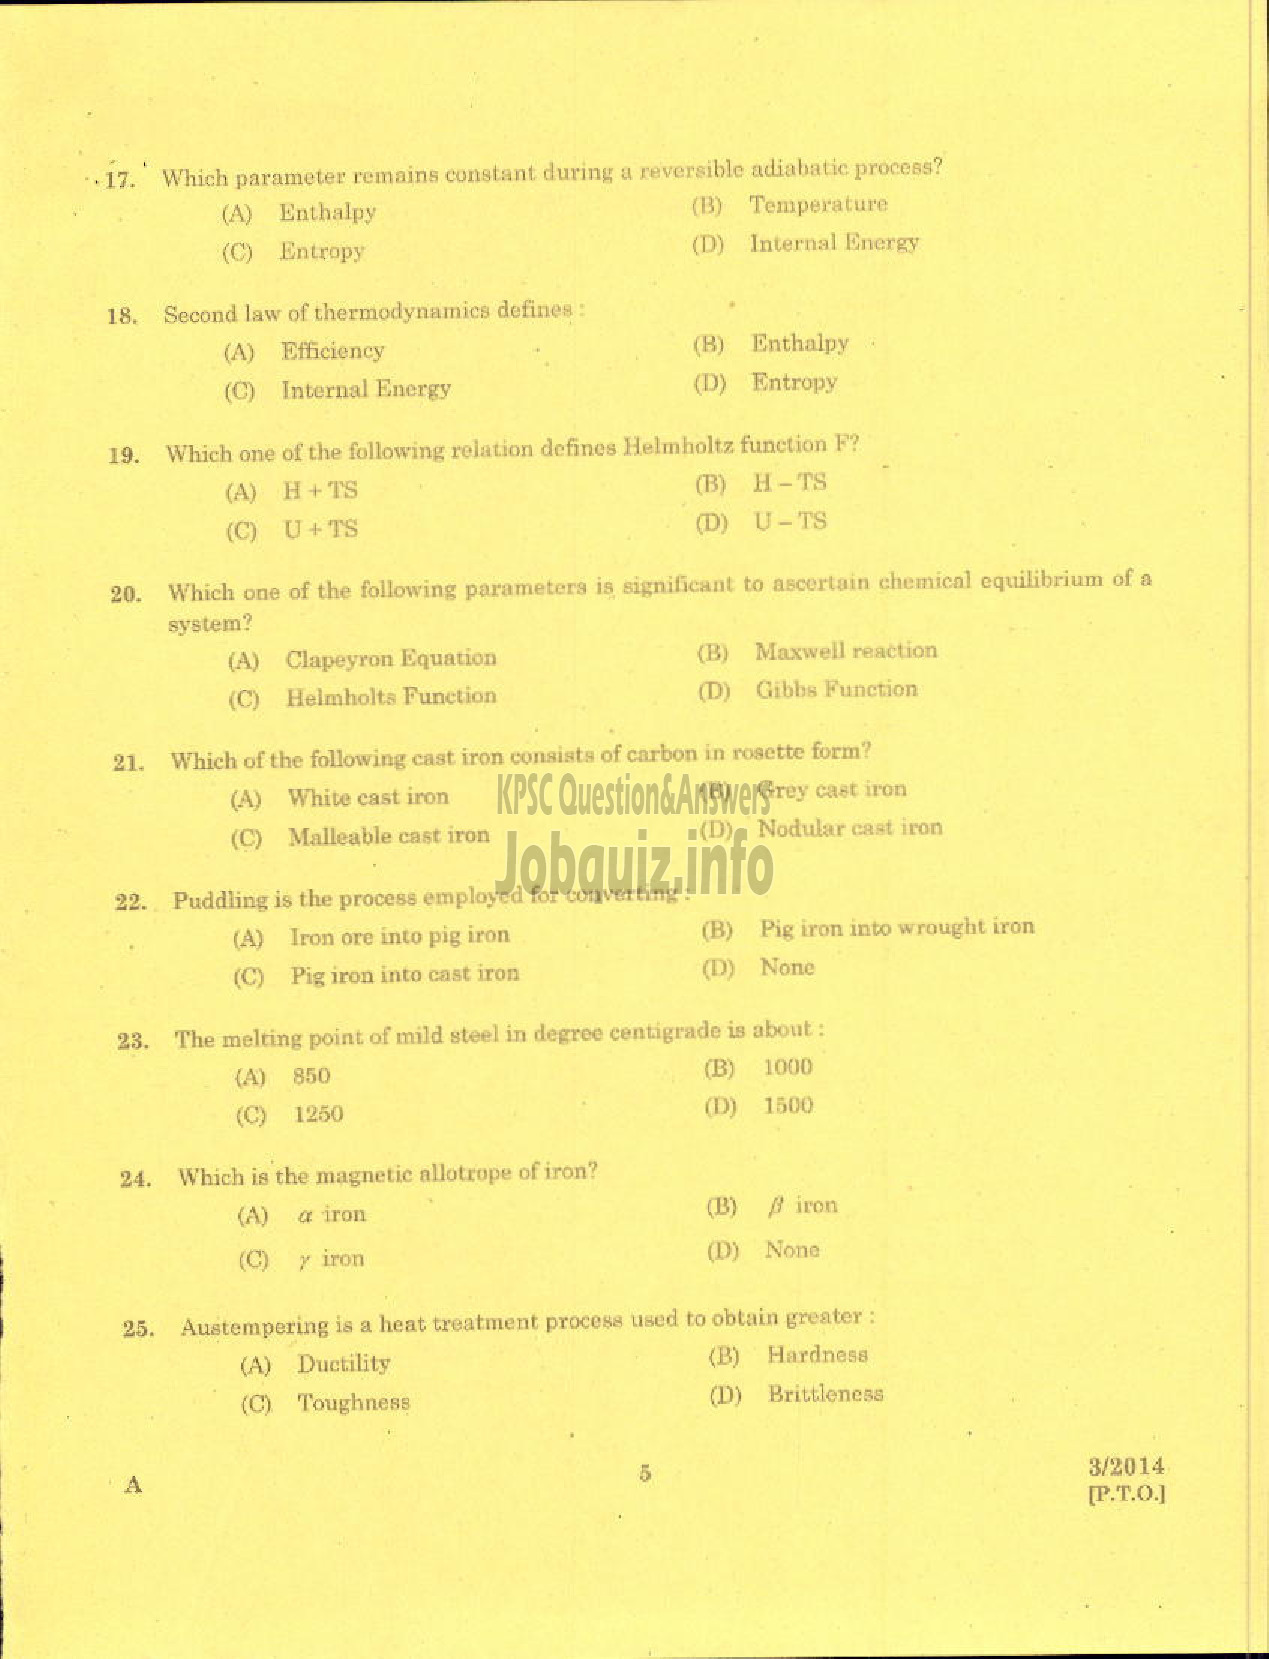 Kerala PSC Question Paper - LECTURER IN MACHANICAL ENGINEERING POLYTECHNICS TECHNICAL EDUCATION-3